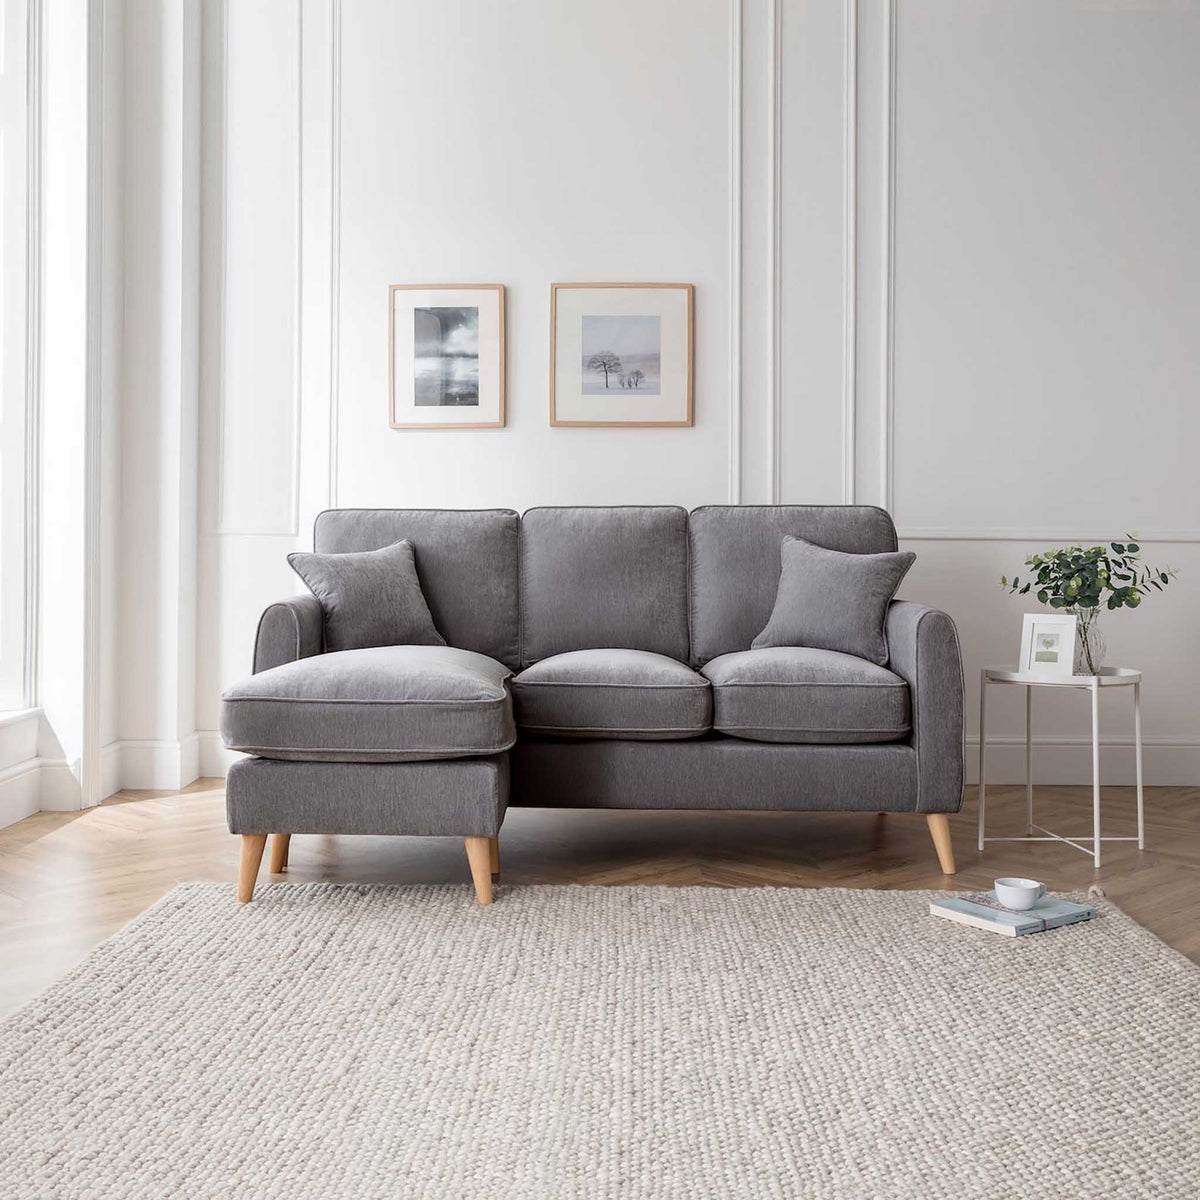 Sofa-ly Does It: Selecting a Stylish Settee For Your Home